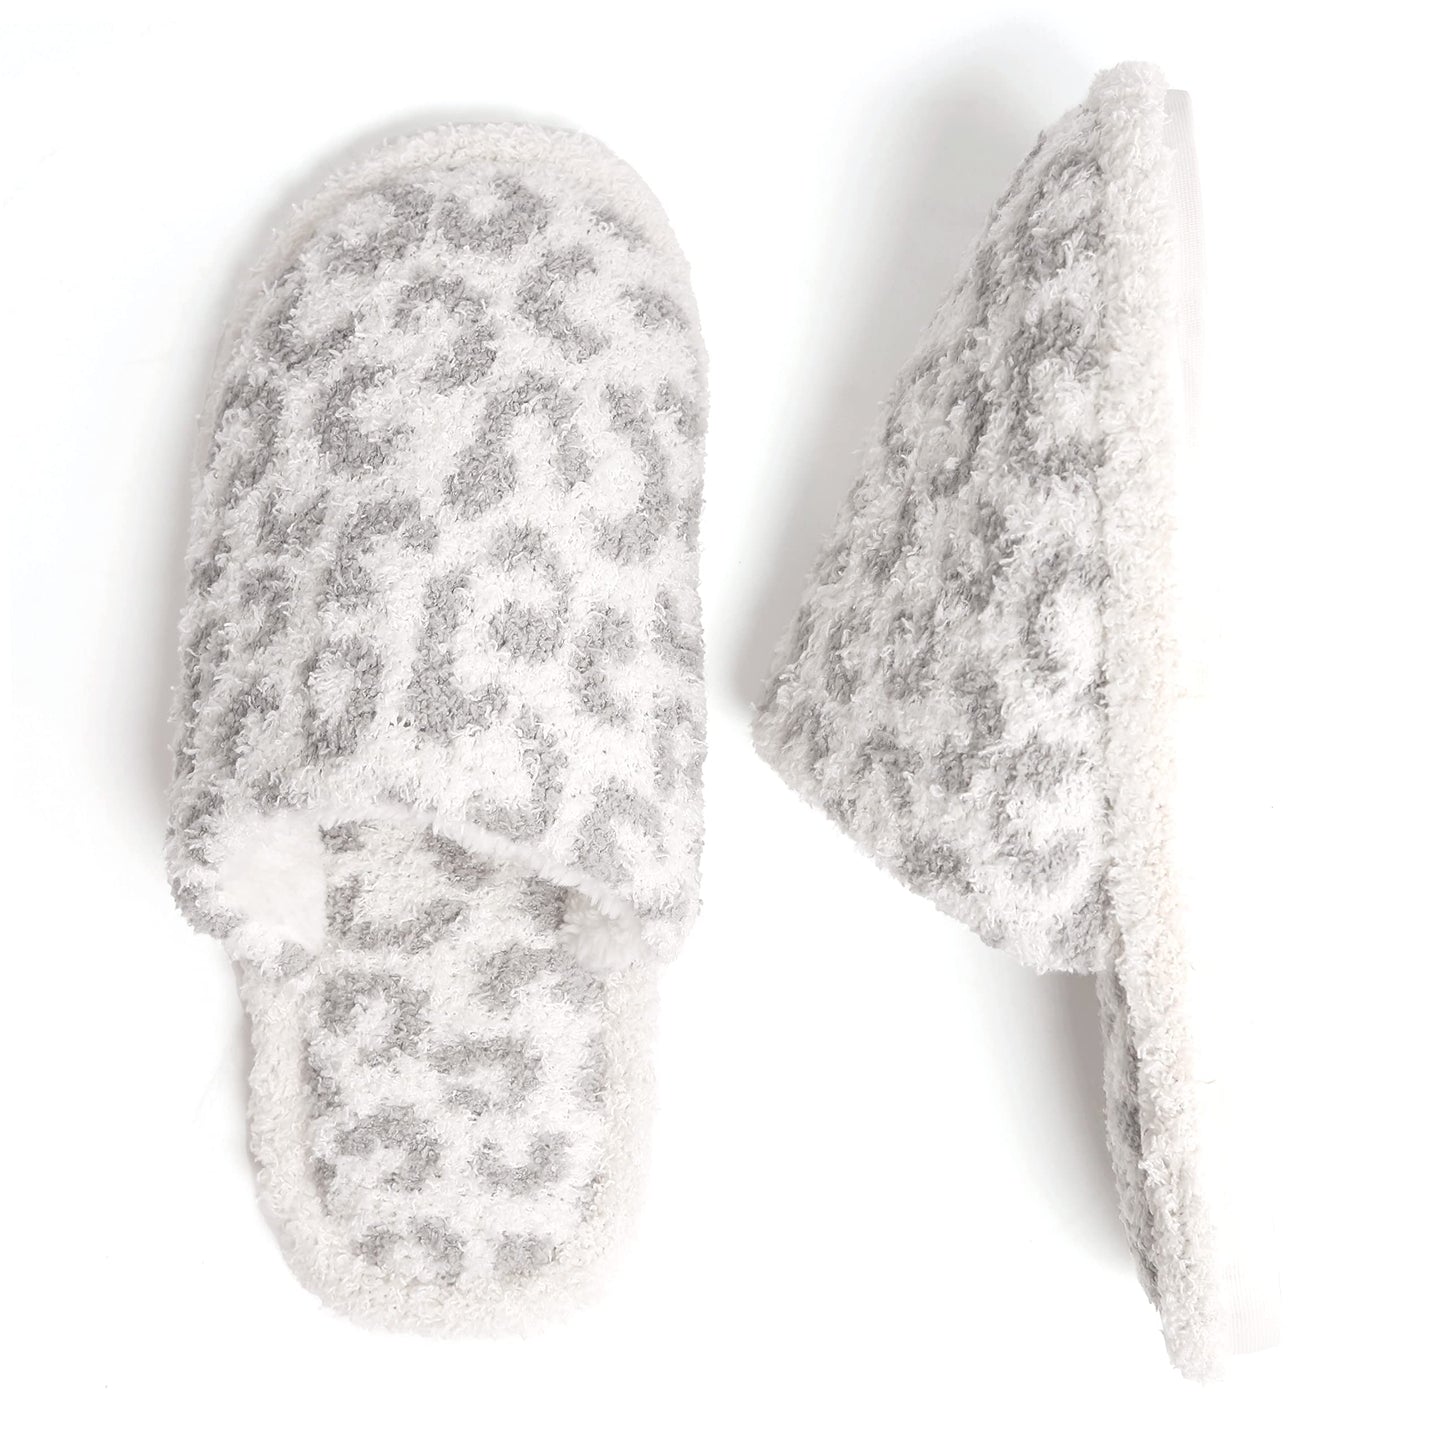 Plush Closed Toe Slippers by Funky Junque